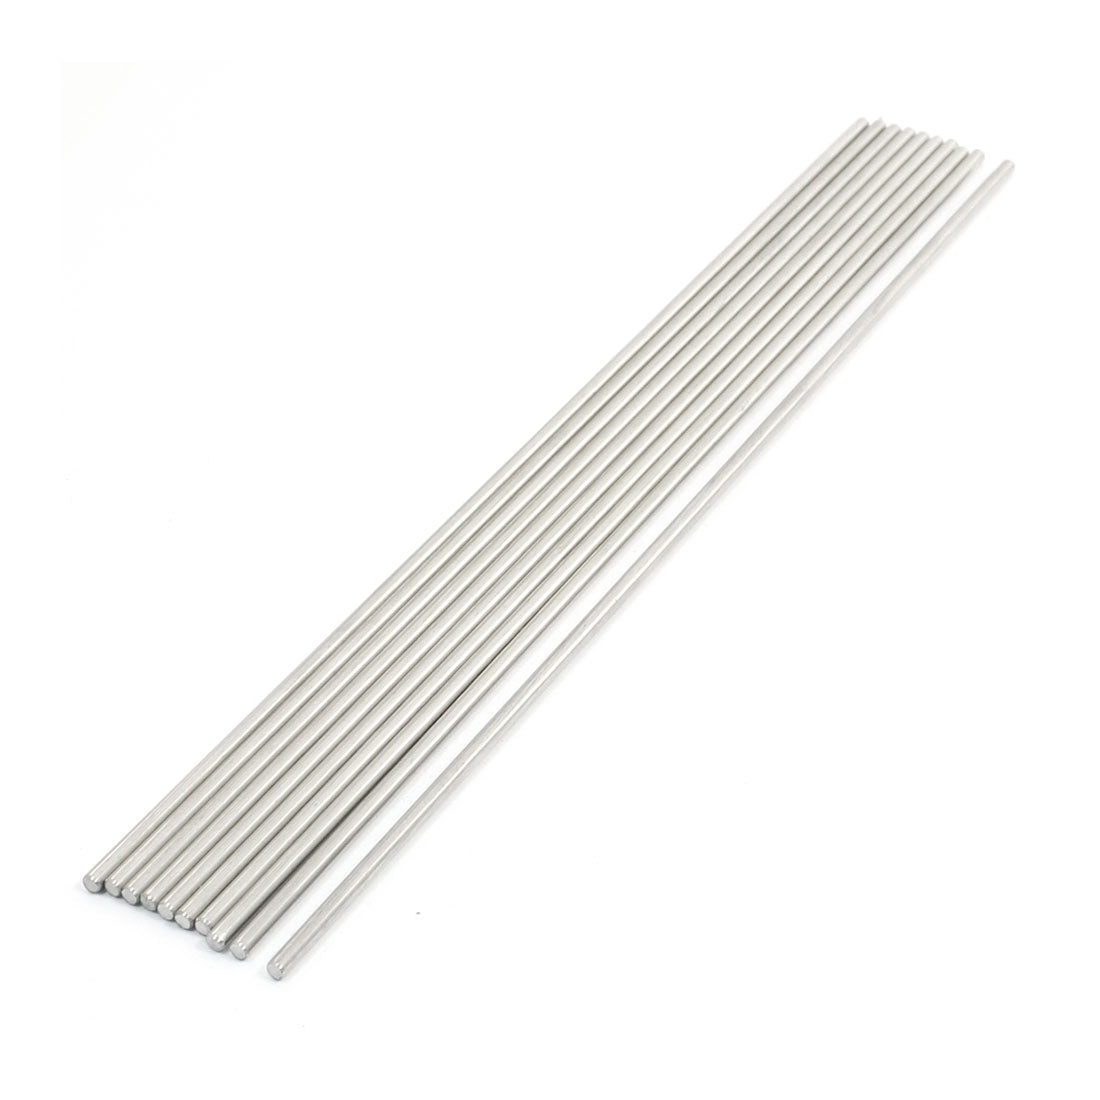 uxcell Uxcell 10Pcs Stainless Steel 200mm x 2.5mm Round Rod Stock for RC Airplane Model